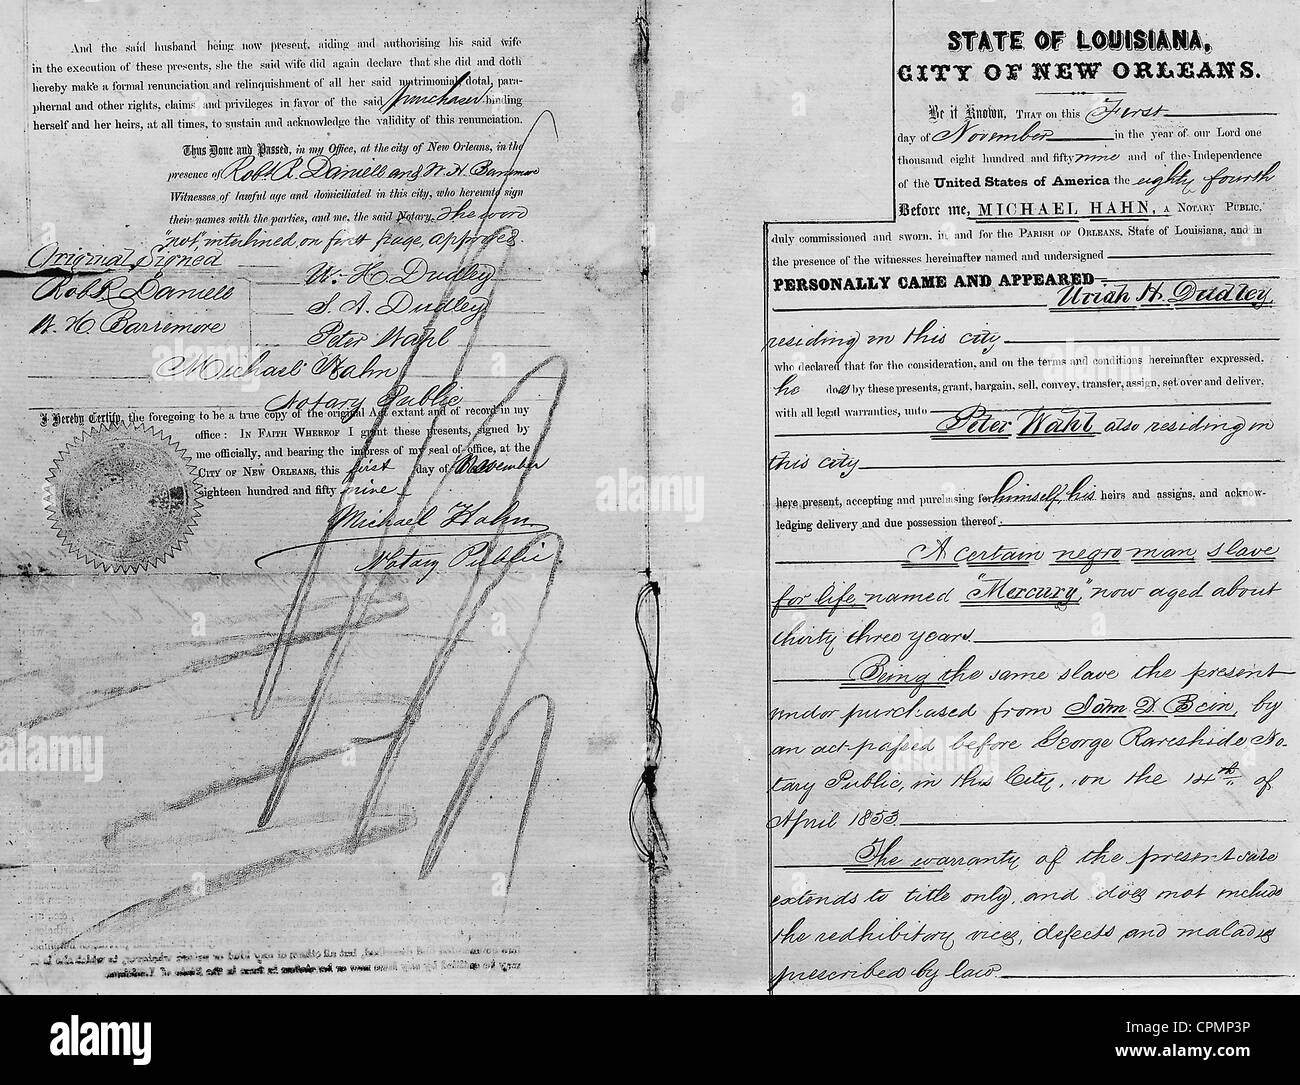 Deed of conveyance of slaves in the United States, 1859 Stock Photo